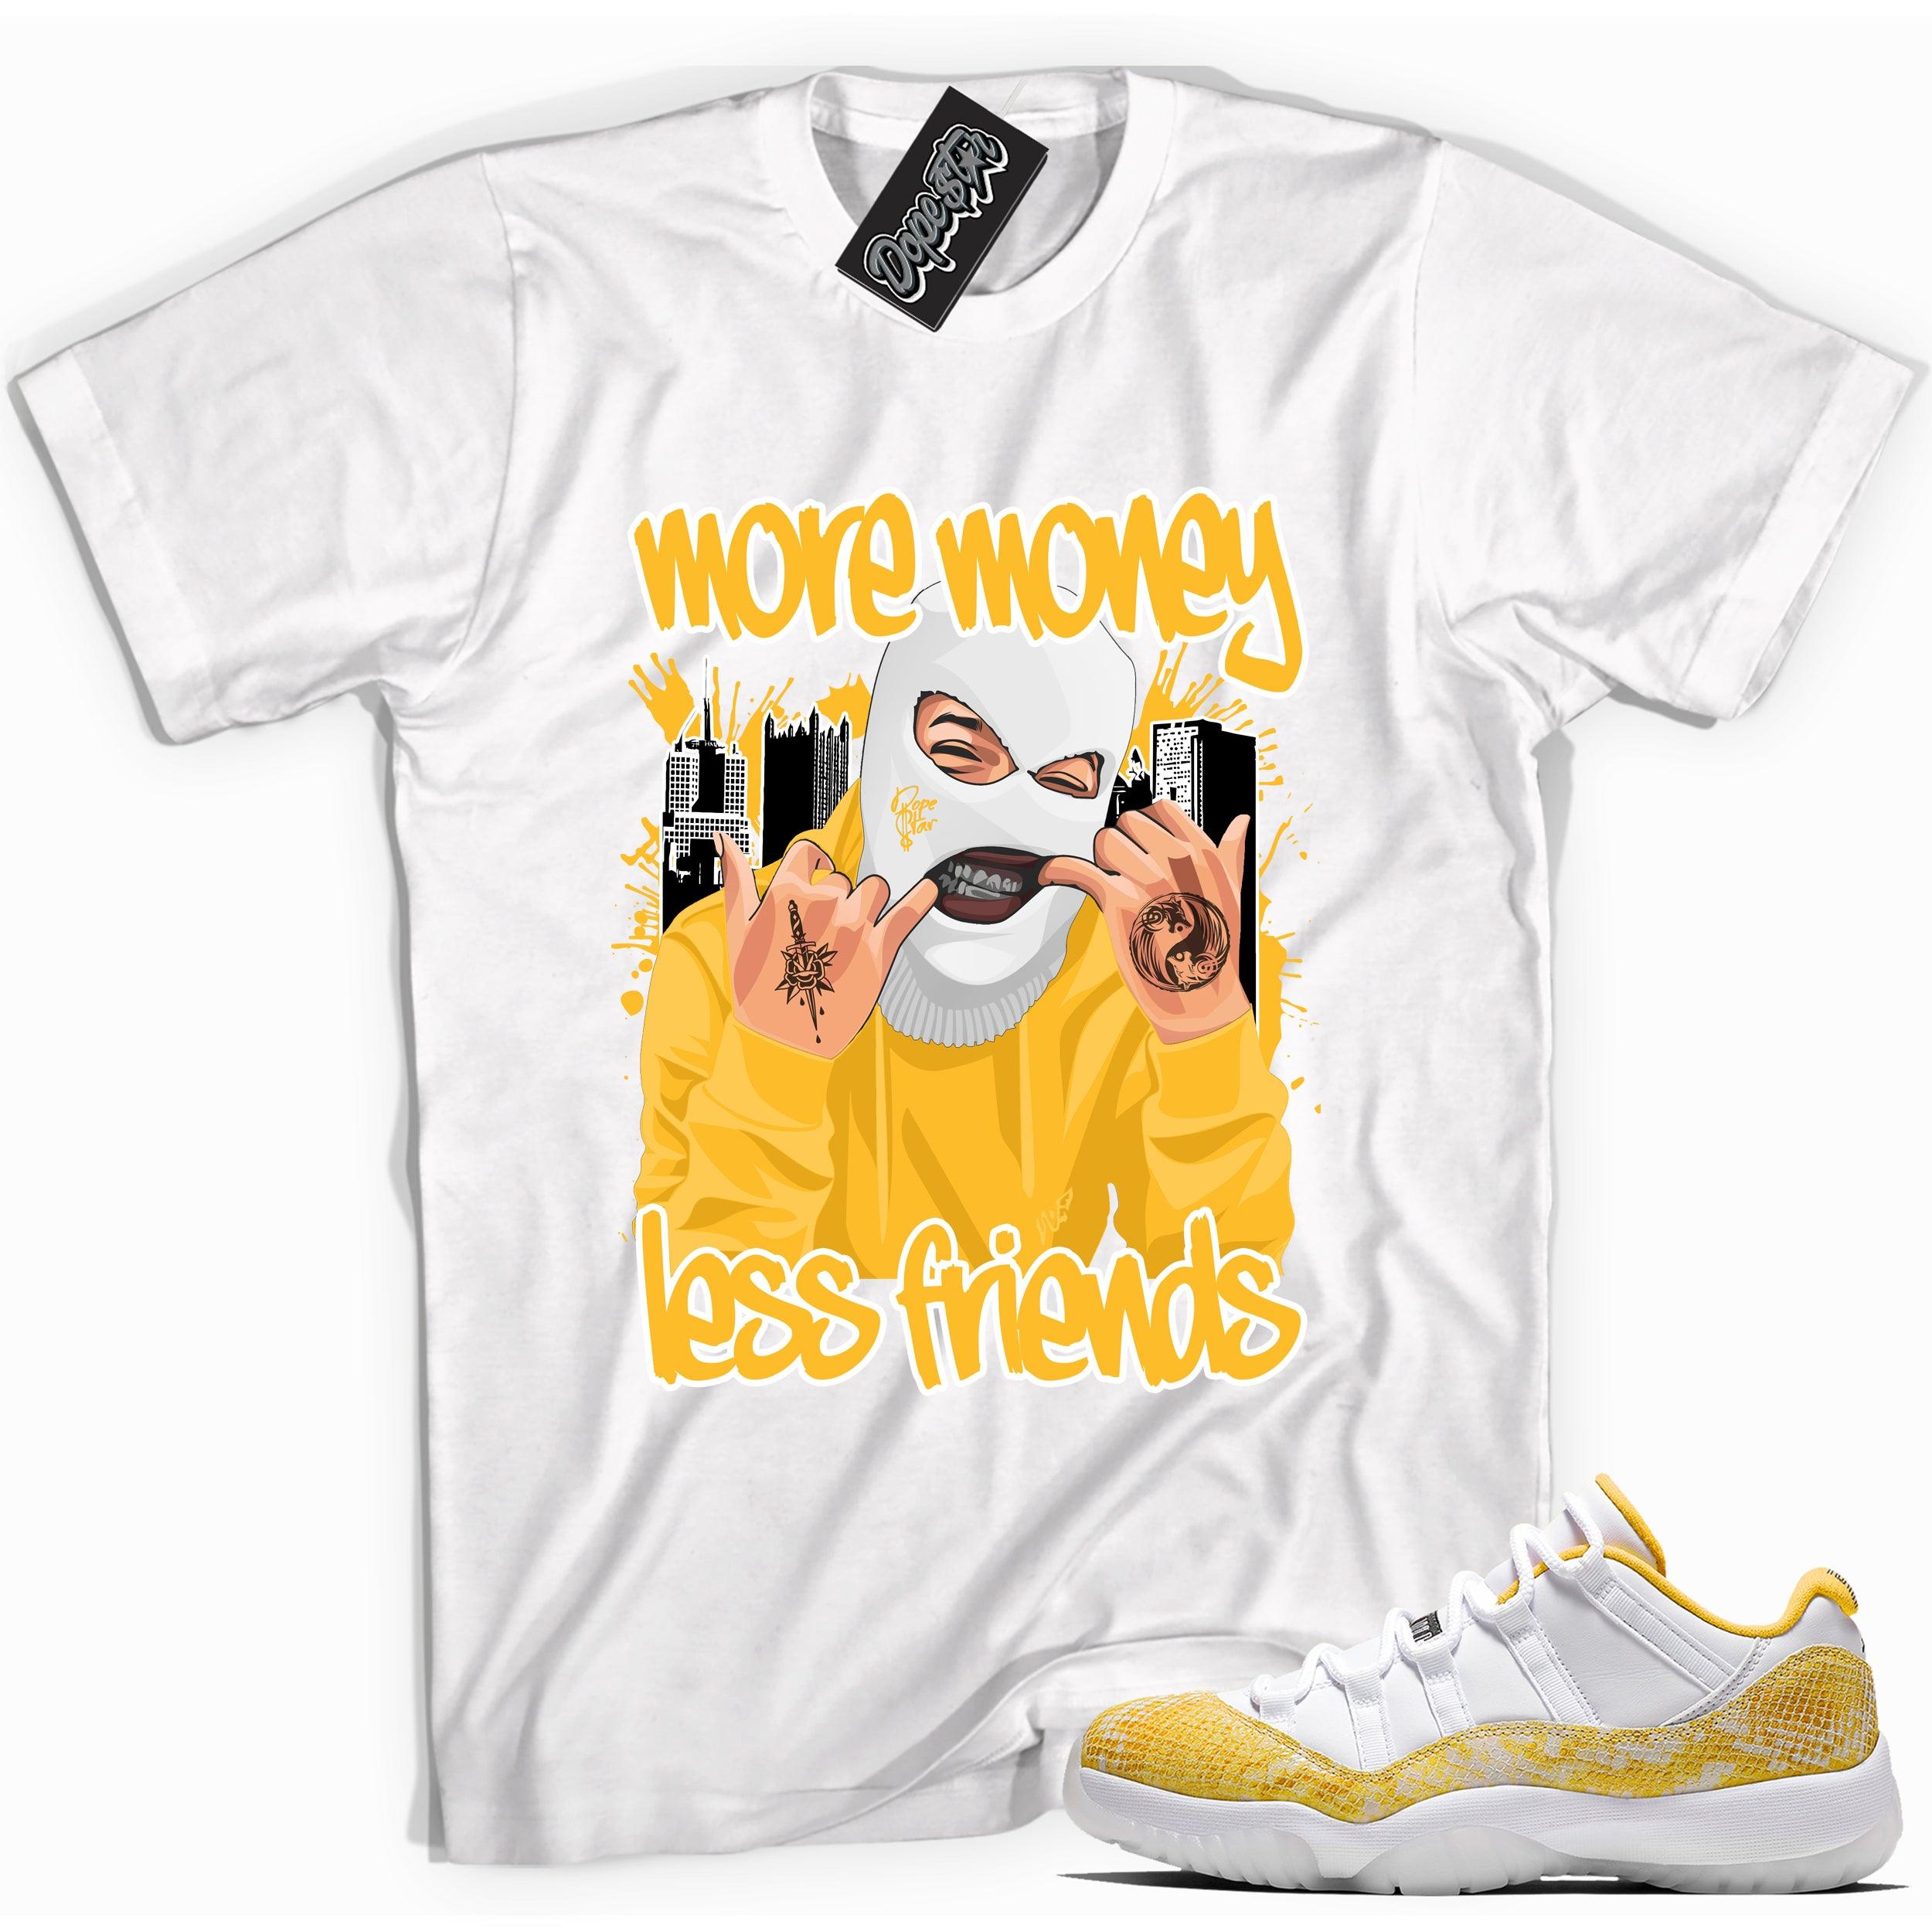 Cool white graphic tee with 'more money less friends' print, that perfectly matches Air Jordan 11 Low Yellow Snakeskin sneakers